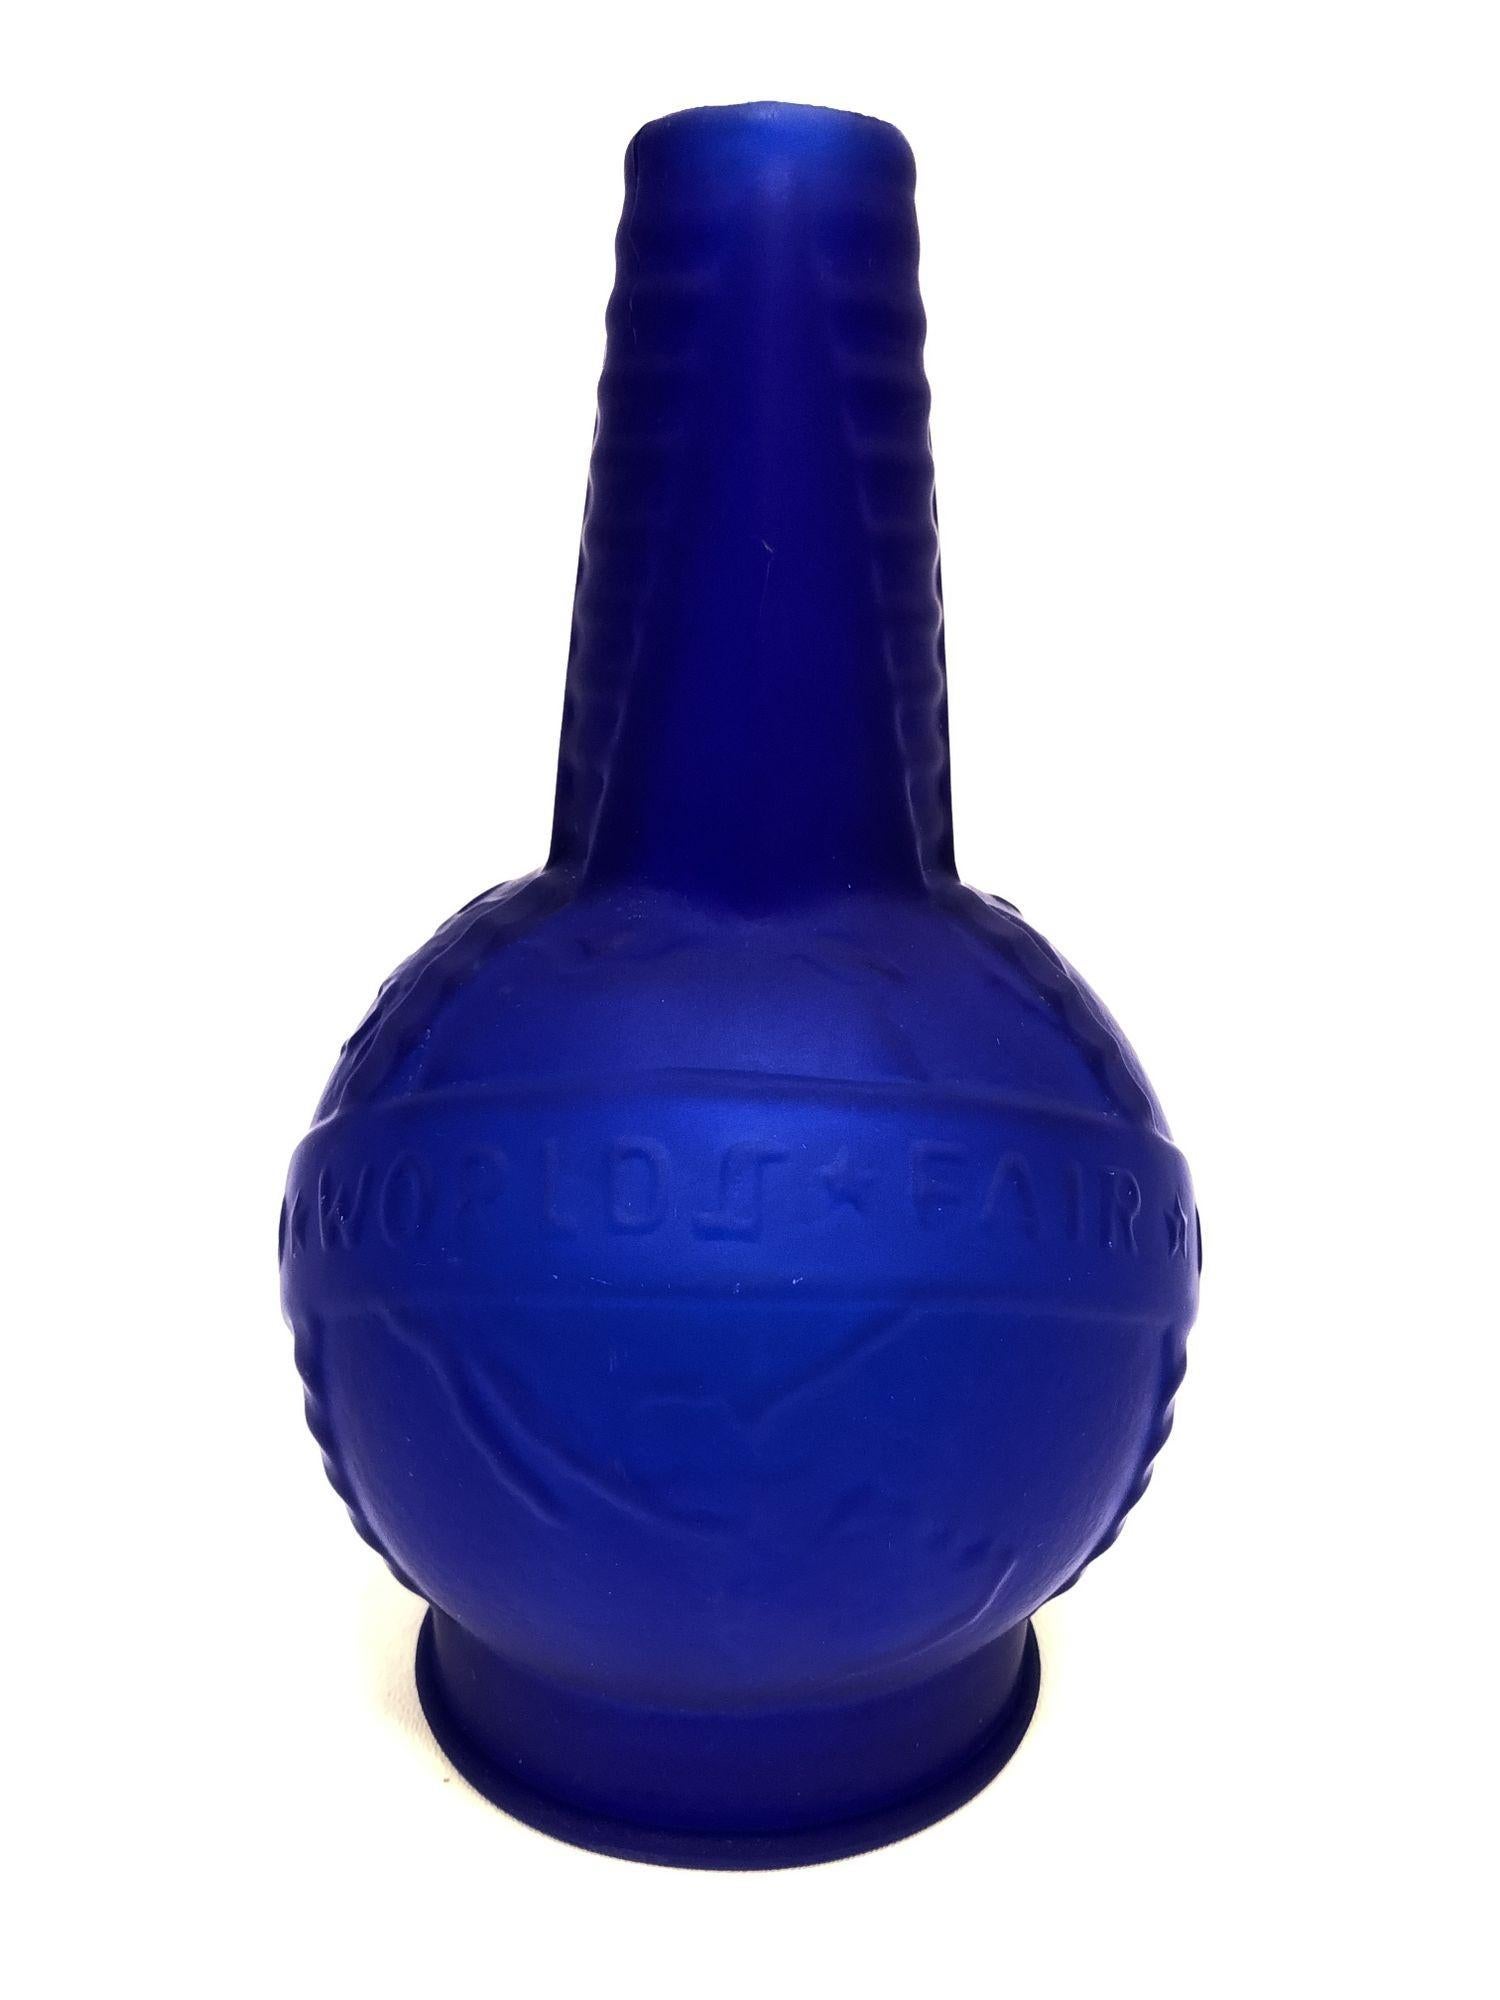 Frosted Vianne World Fair Cobalt Blue Globe In Excellent Condition For Sale In Van Nuys, CA